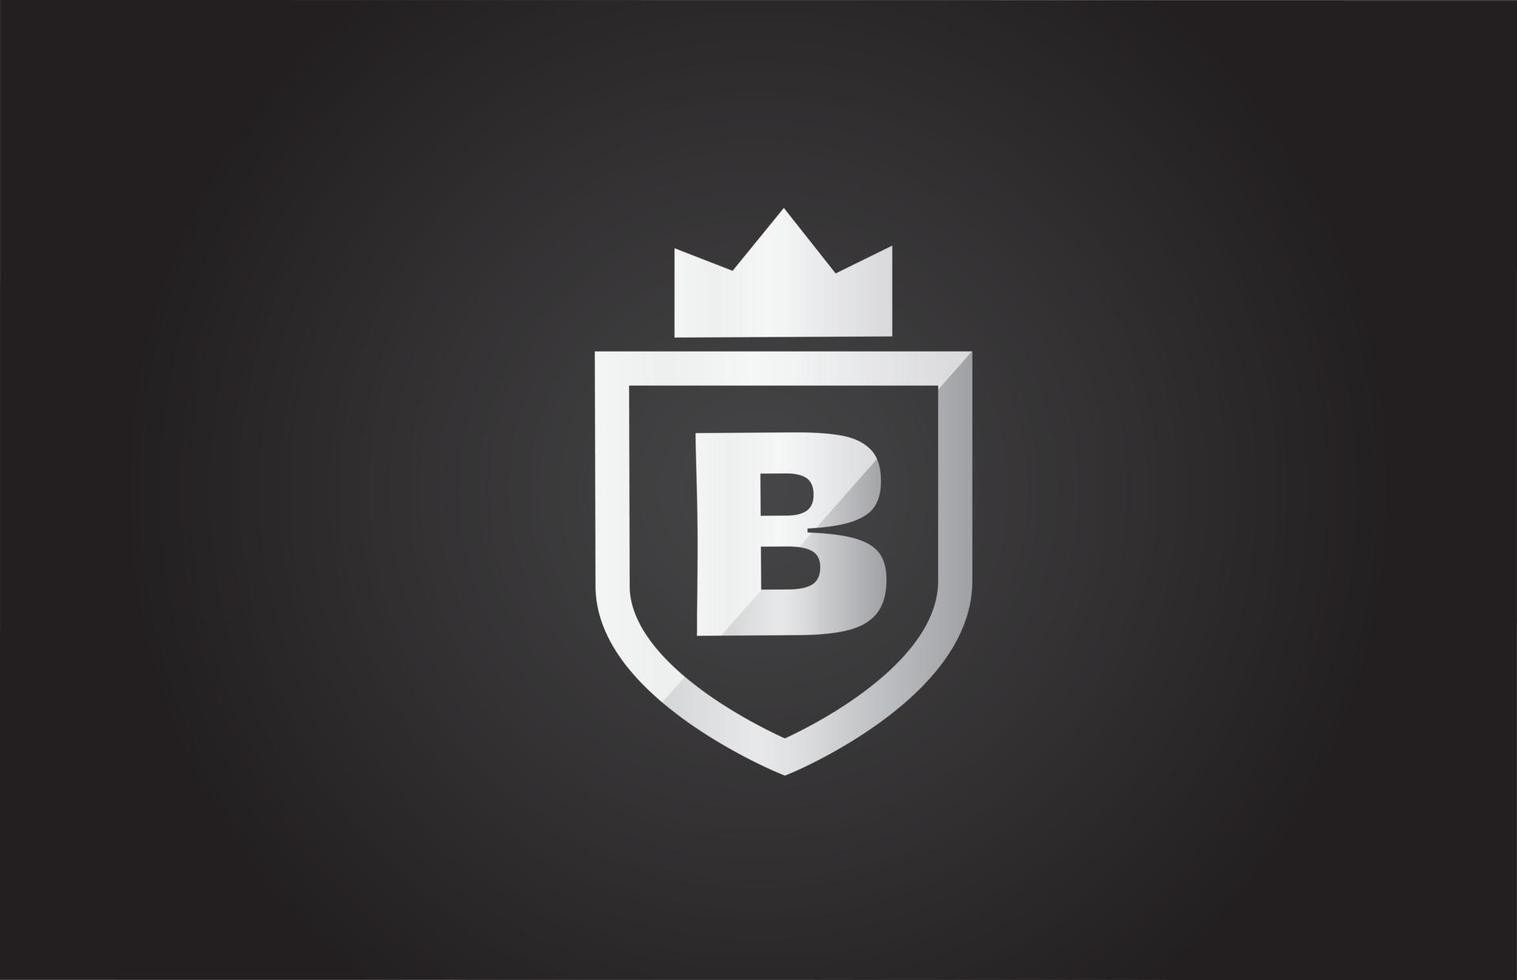 B alphabet letter logo icon in grey and black color. Shield design for company identity with king crown vector